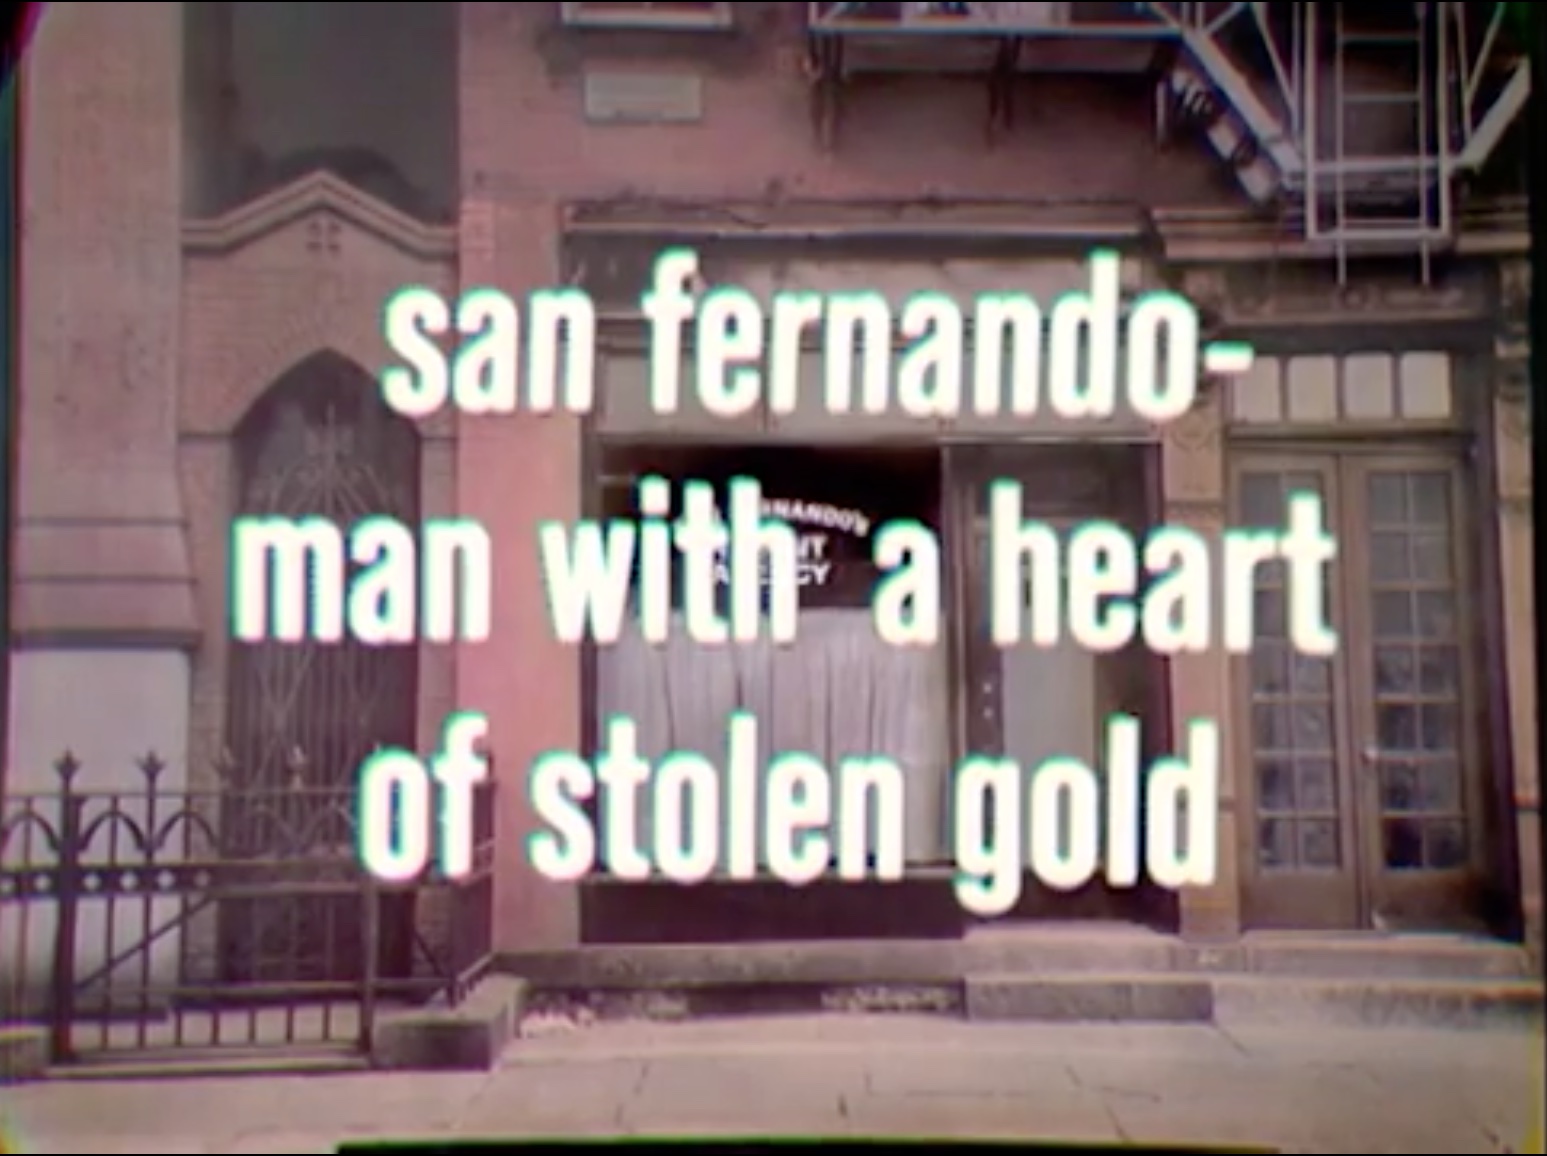 San Fernando: A Man With A Heart of Stolen Gold - The Red Skelton Hour